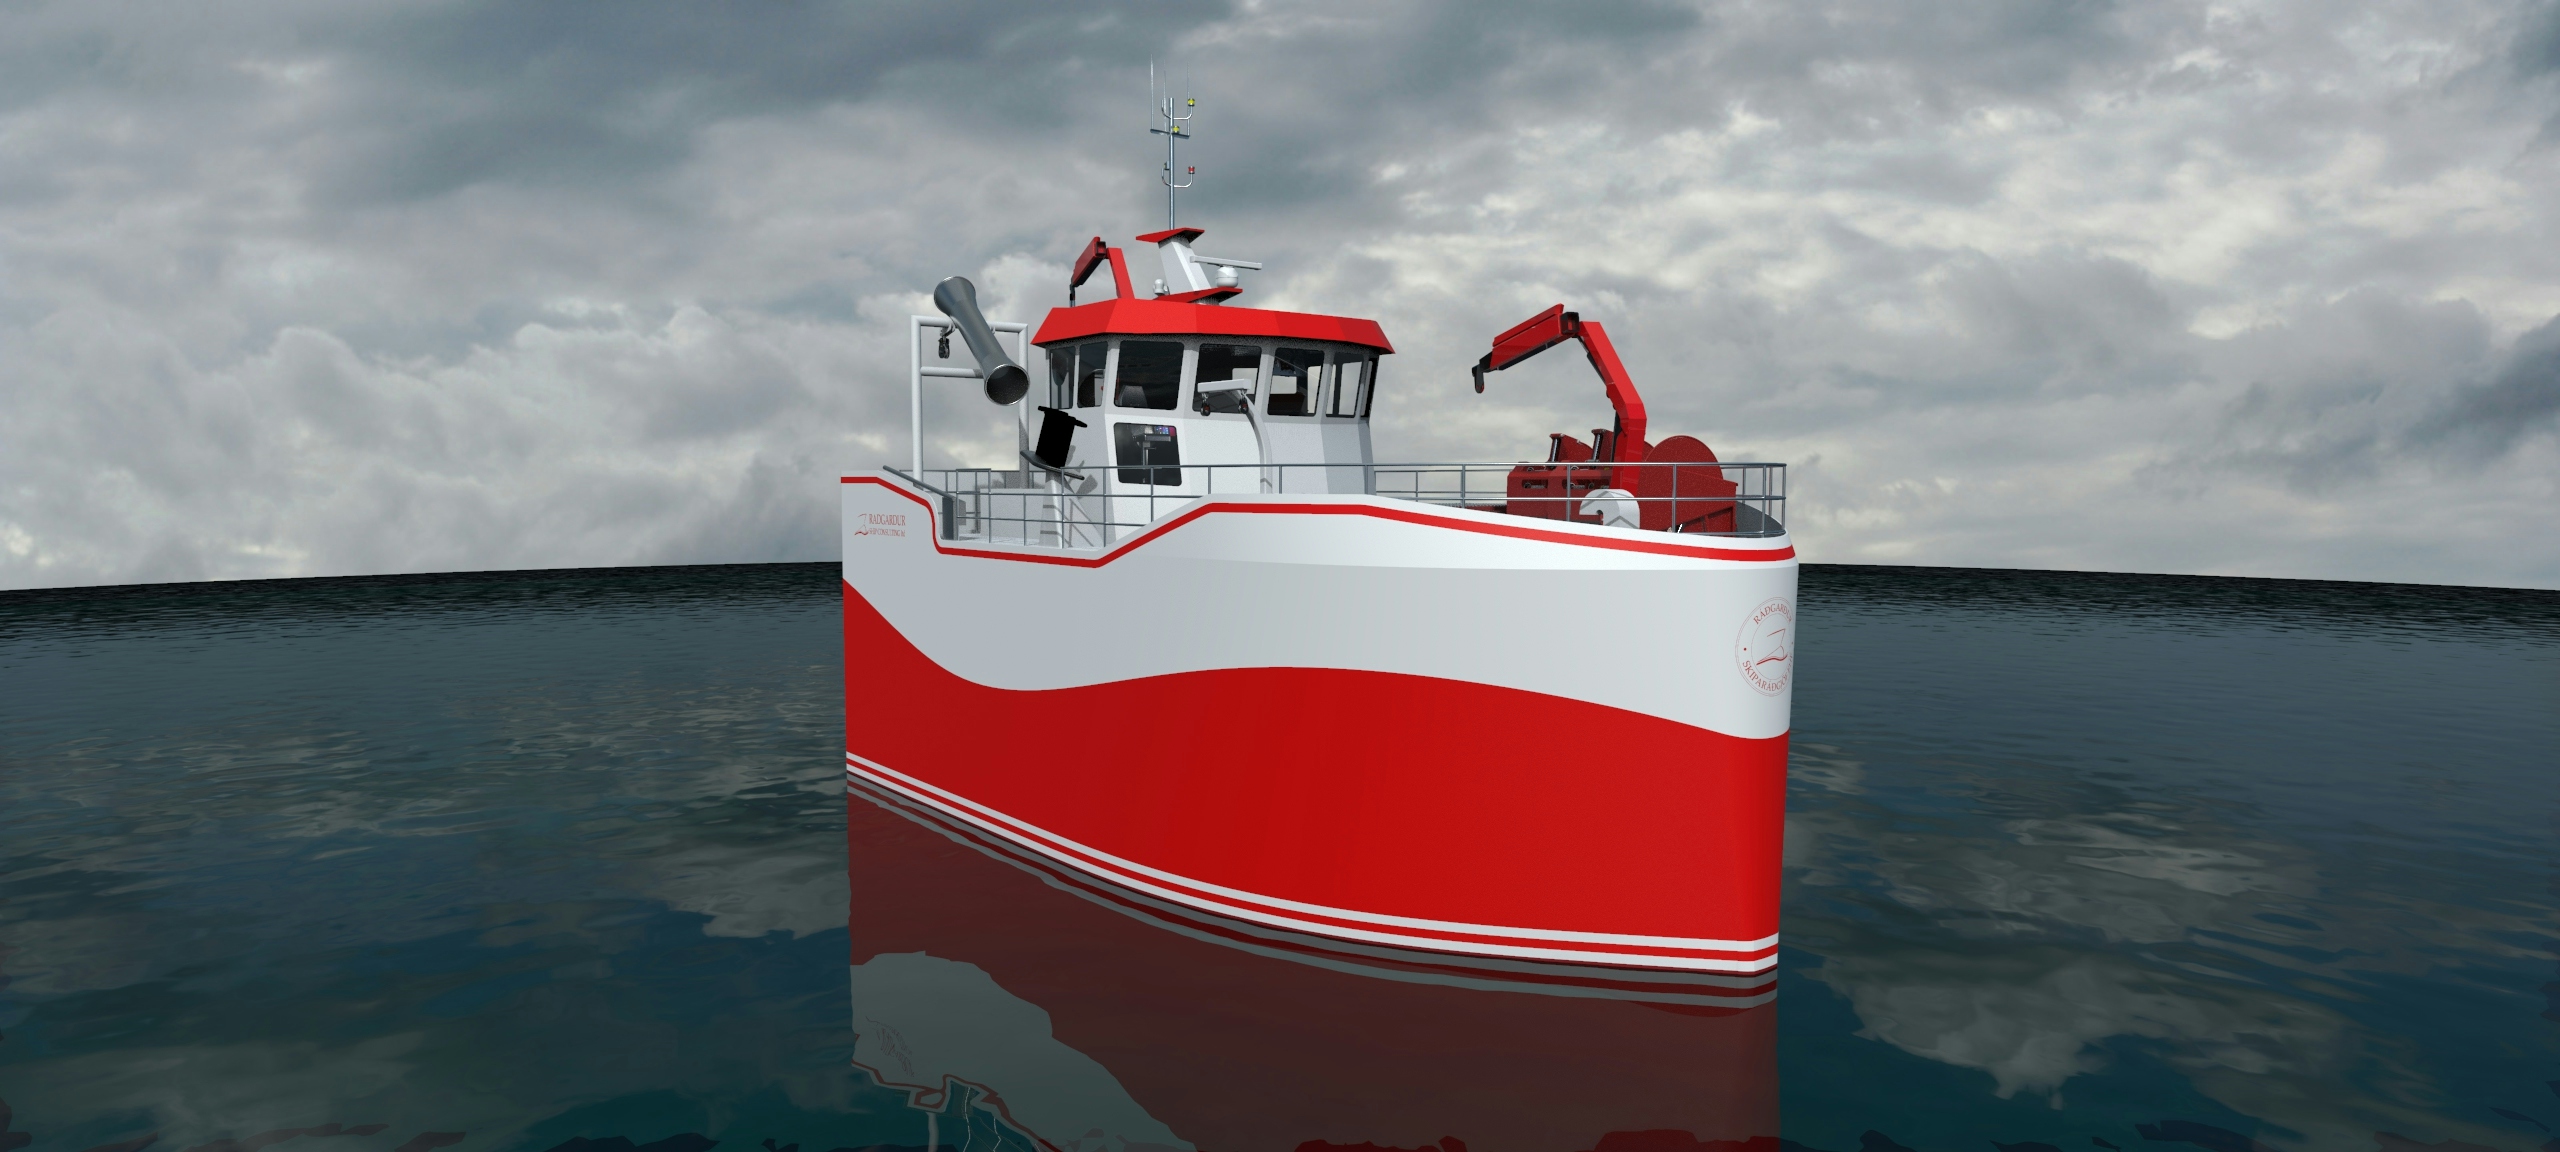 15 meter boat designed drawn and rendered for Radgard Ship Consulting